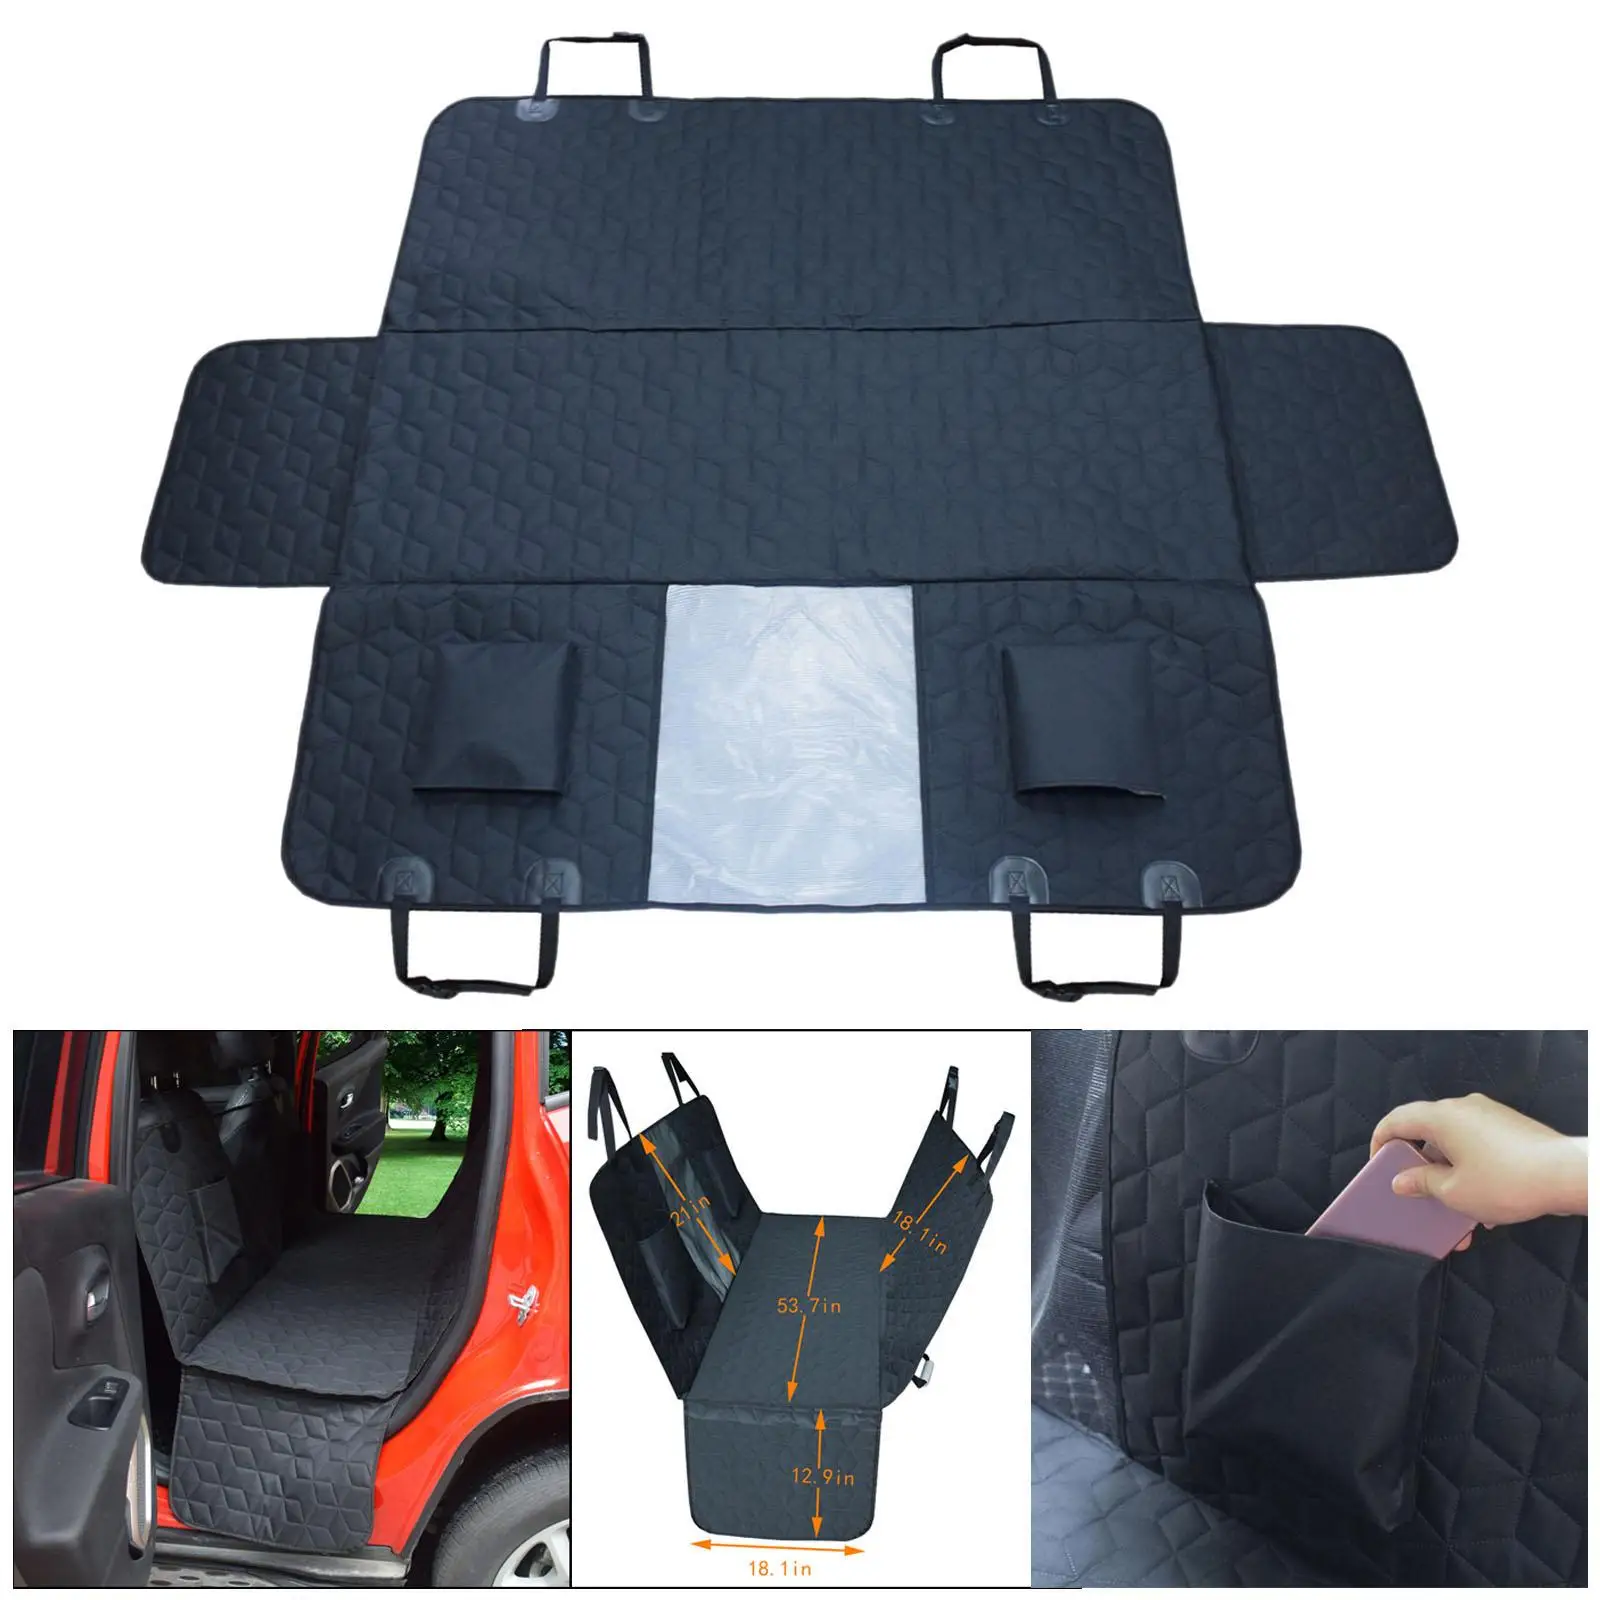 Dog Car Seat Covers Scratchproof with Mesh Window Dog Car Hammock Back Seat Cover Protector Pet Seat Cover